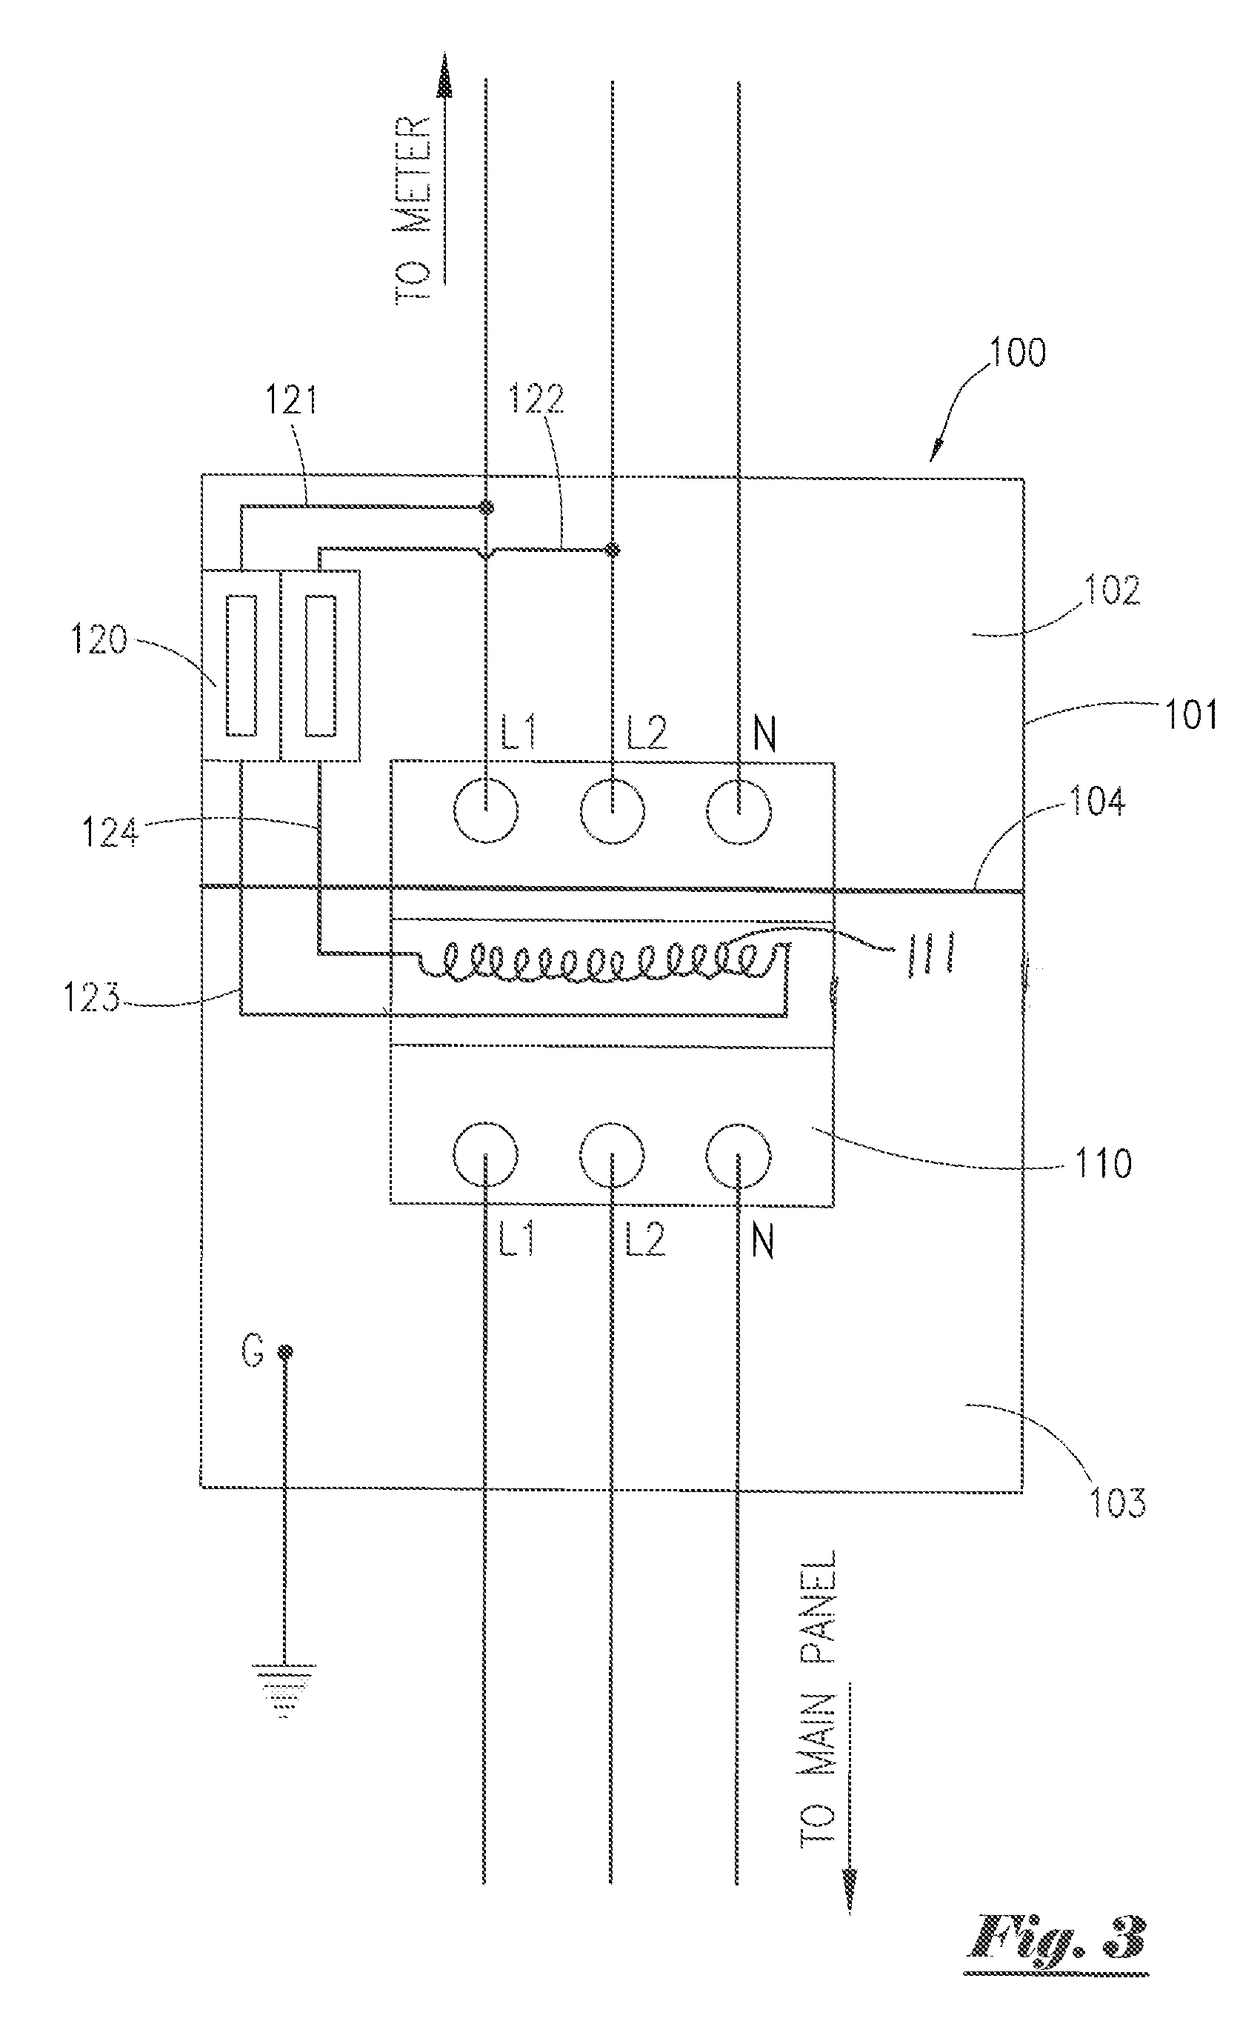 Method and Apparatus for Automatic Electricity Backfeed Protection